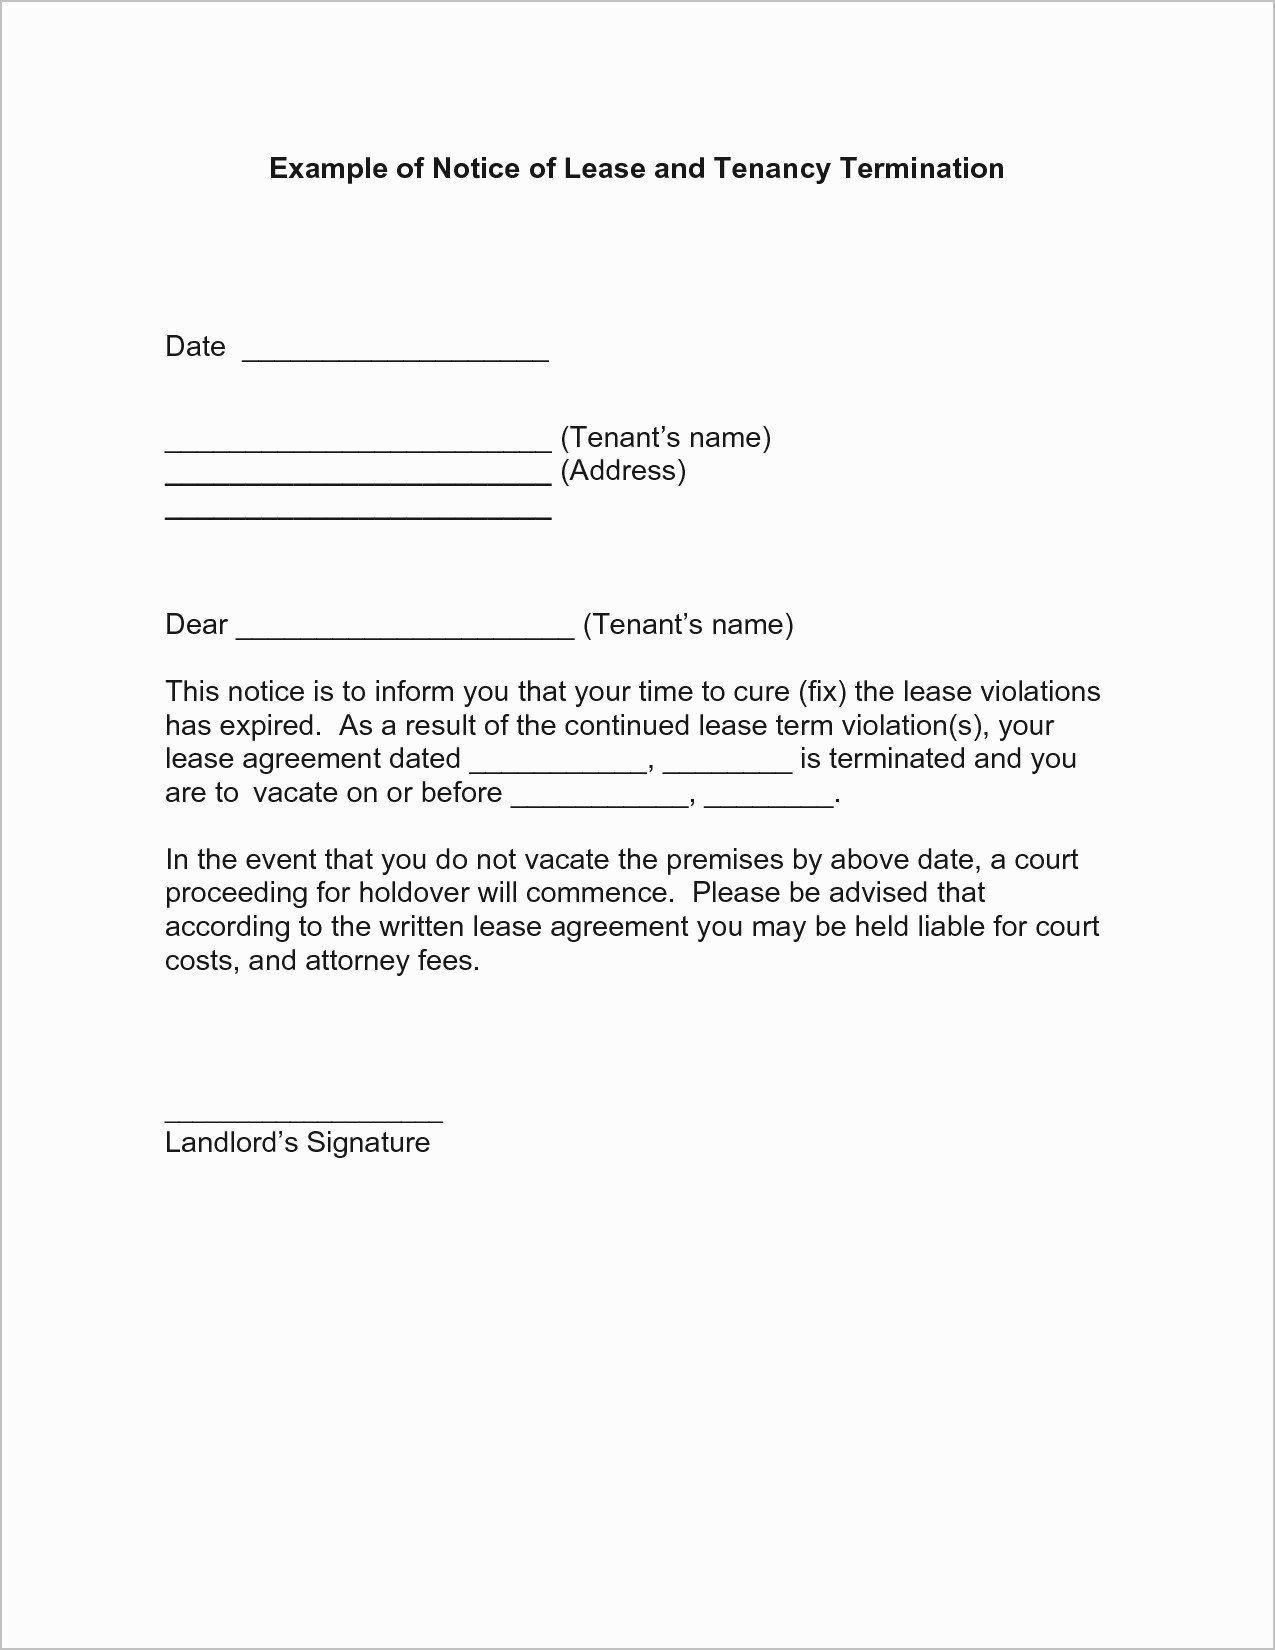 Unauthorized Tenant Letter Template Beautiful Unauthorized Tenant Letter Template Examples